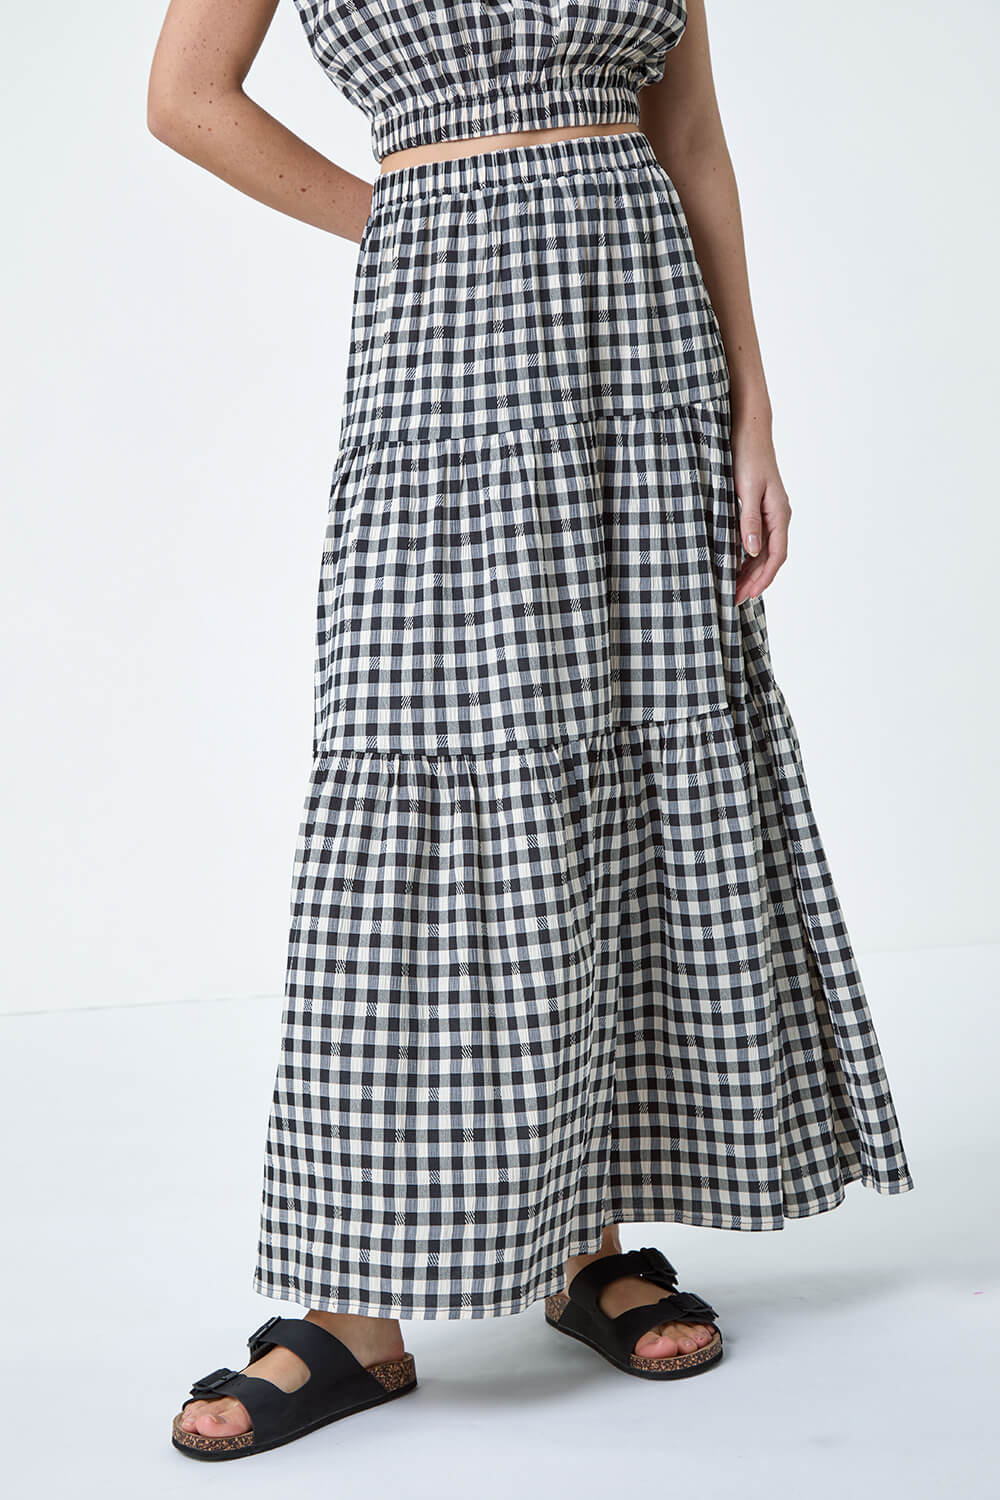 Black Gingham Check Tiered Maxi Skirt, Image 4 of 7